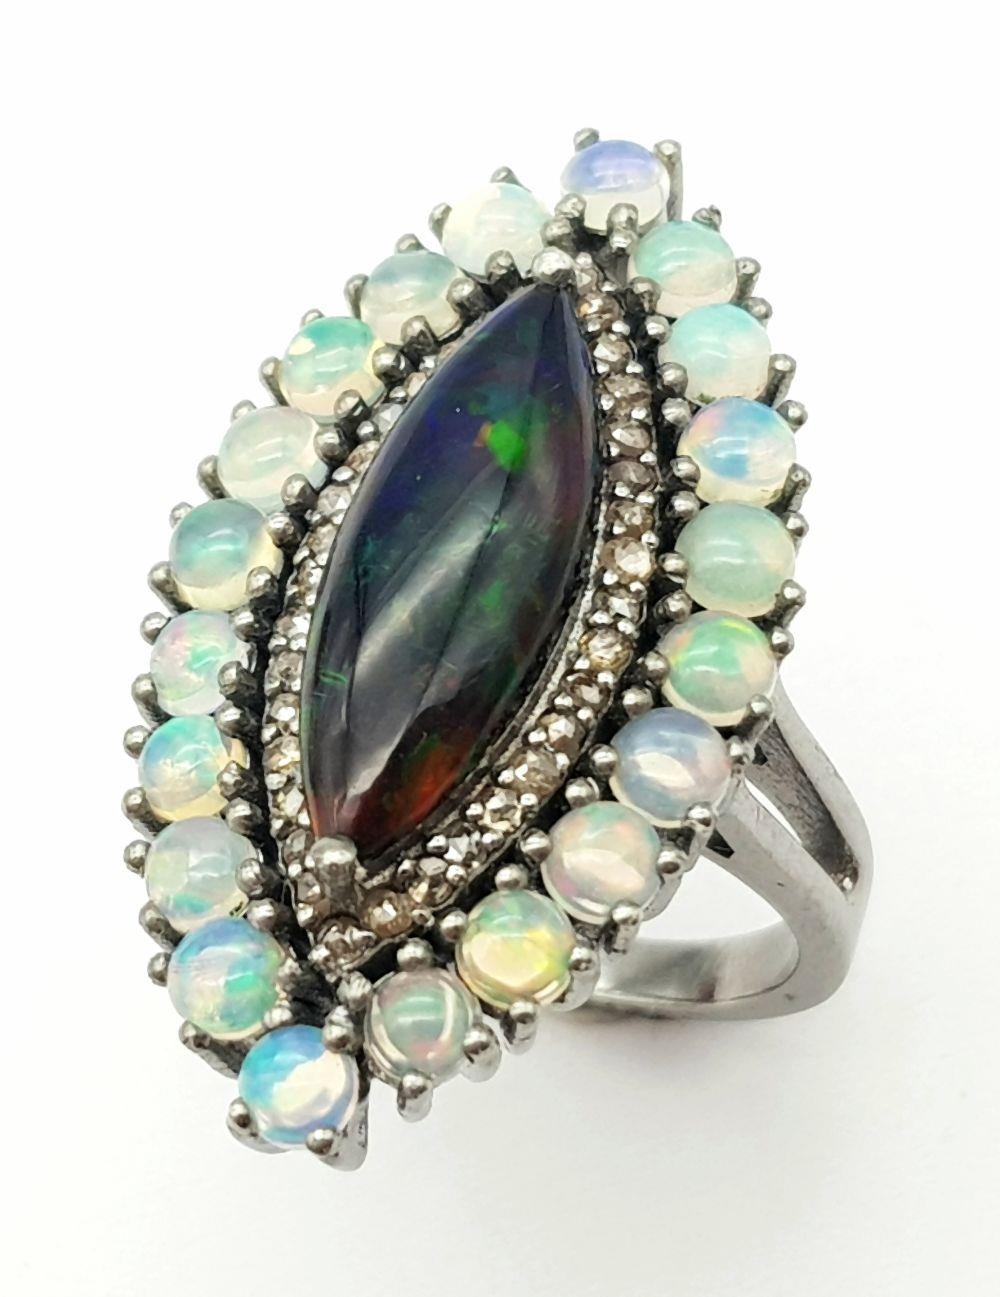 A 2ct Black Opal Marquise Shaped Ring with 1.80ctw White opal surround and .40ctw of Diamond